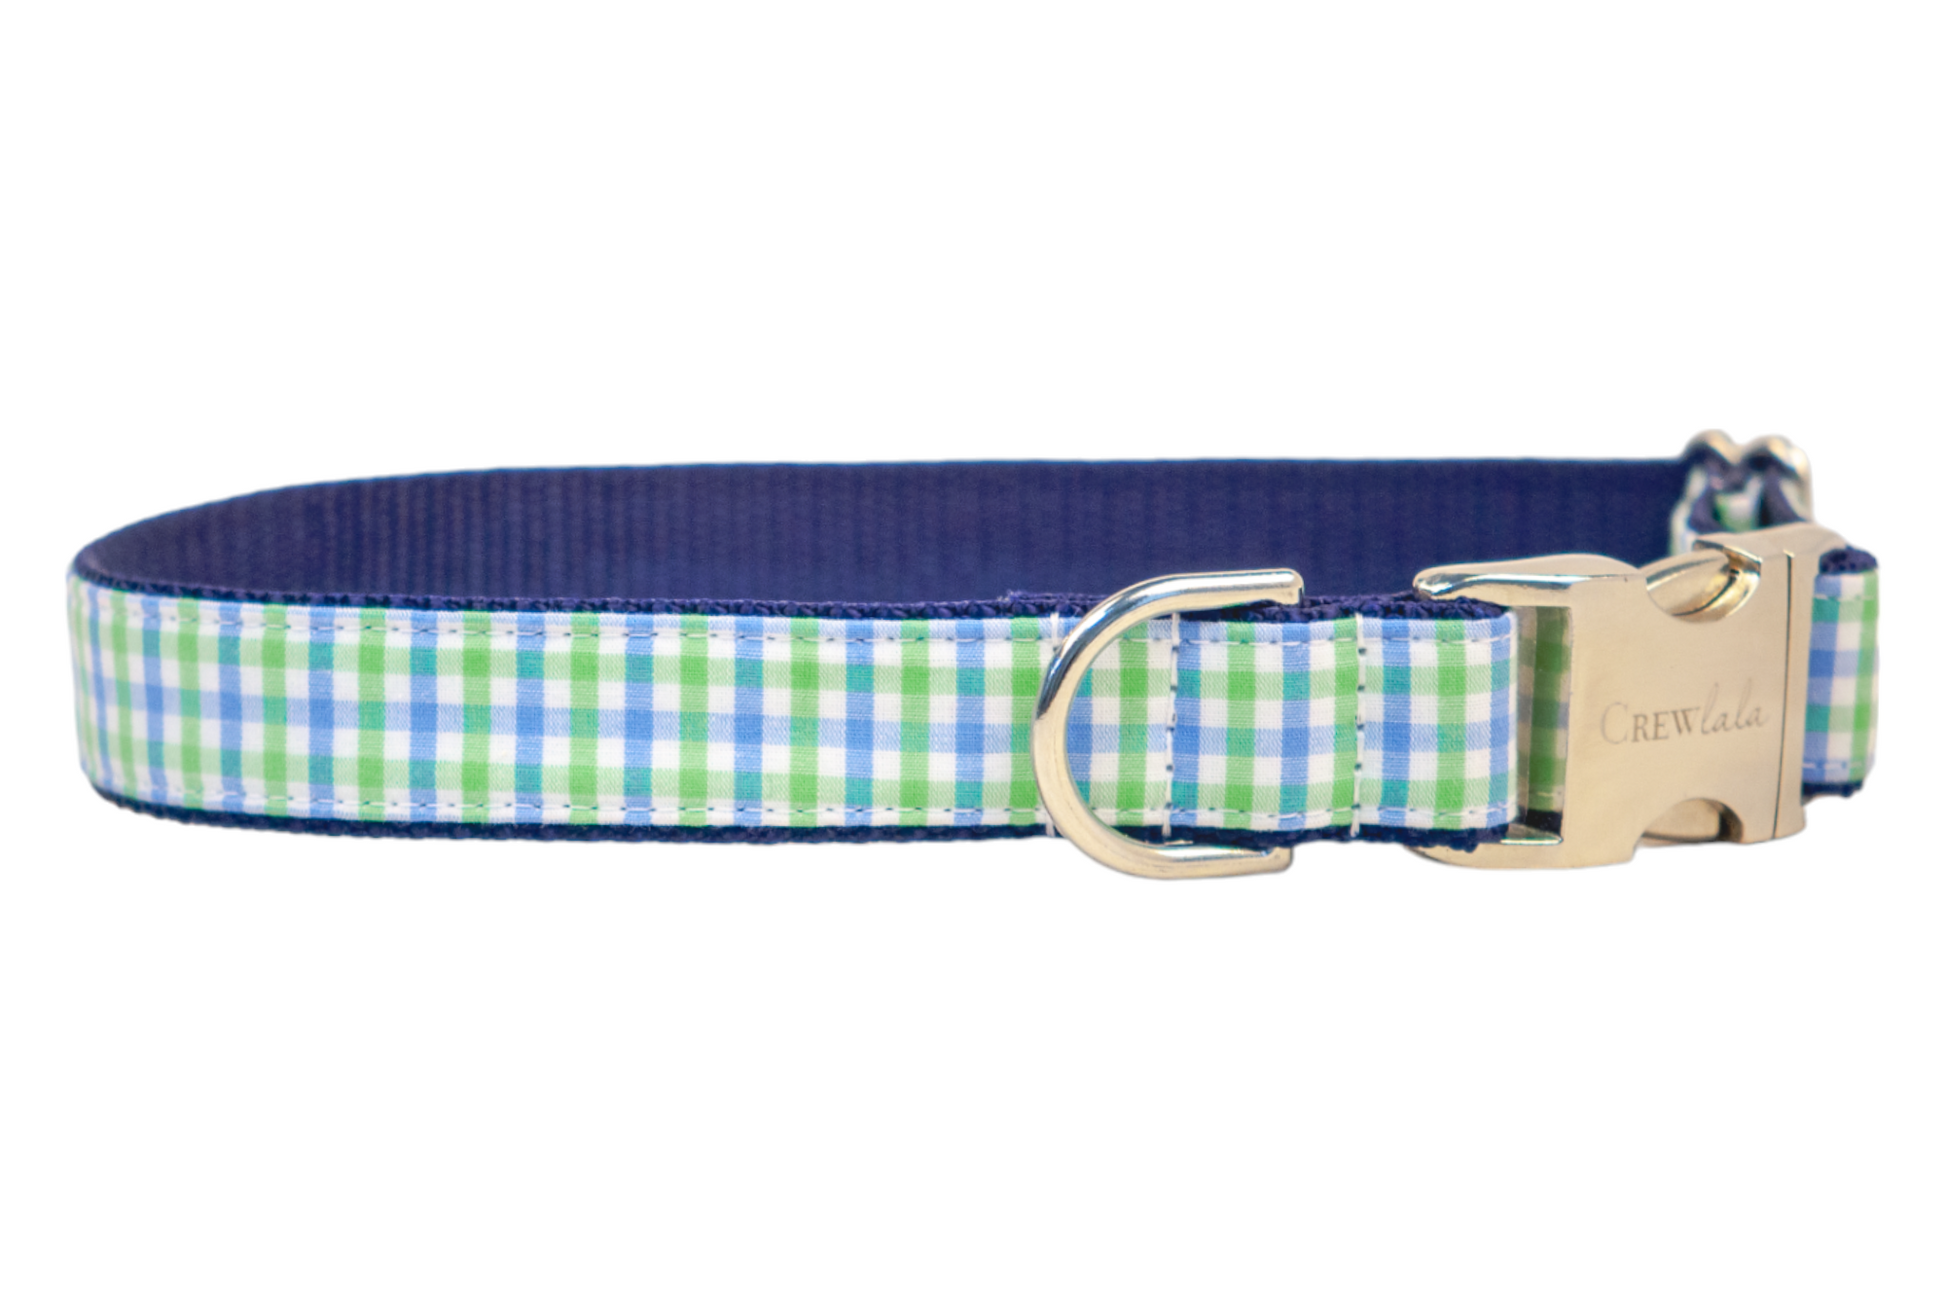 Lime & Blue Island Gingham Dog Collar - Two Styles! - Crew LaLa